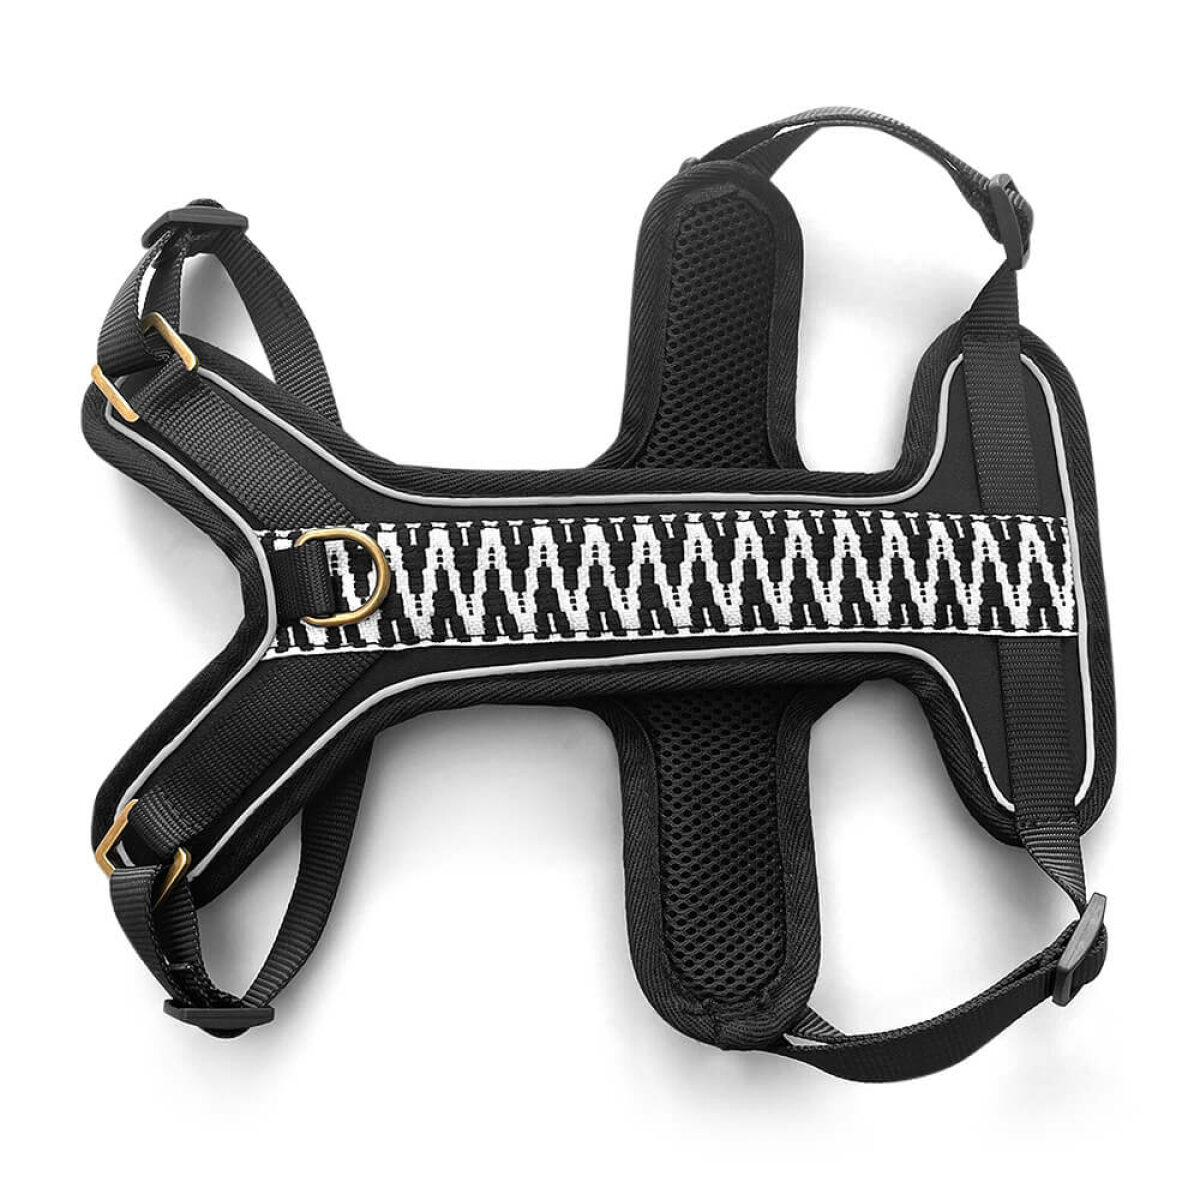 Dog with premium dog harness Padded in black/white front